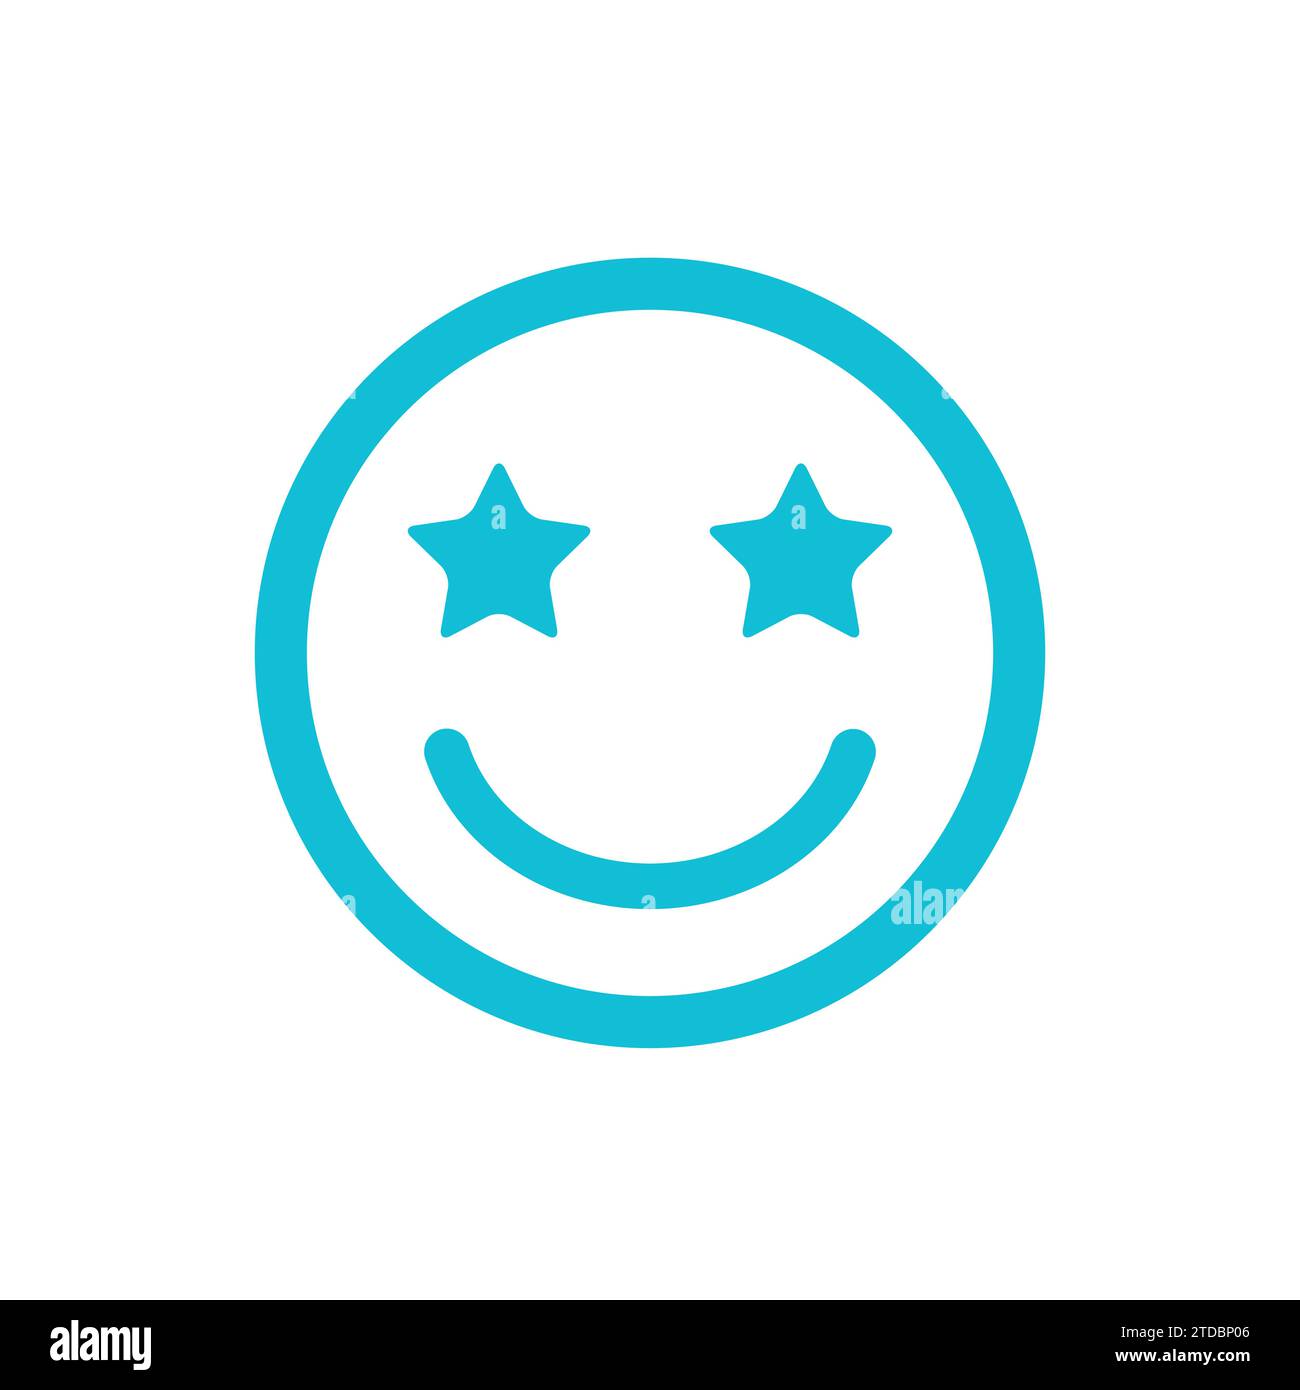 Wonderful, cheerful emoji icon. From blue icon set. Stock Vector